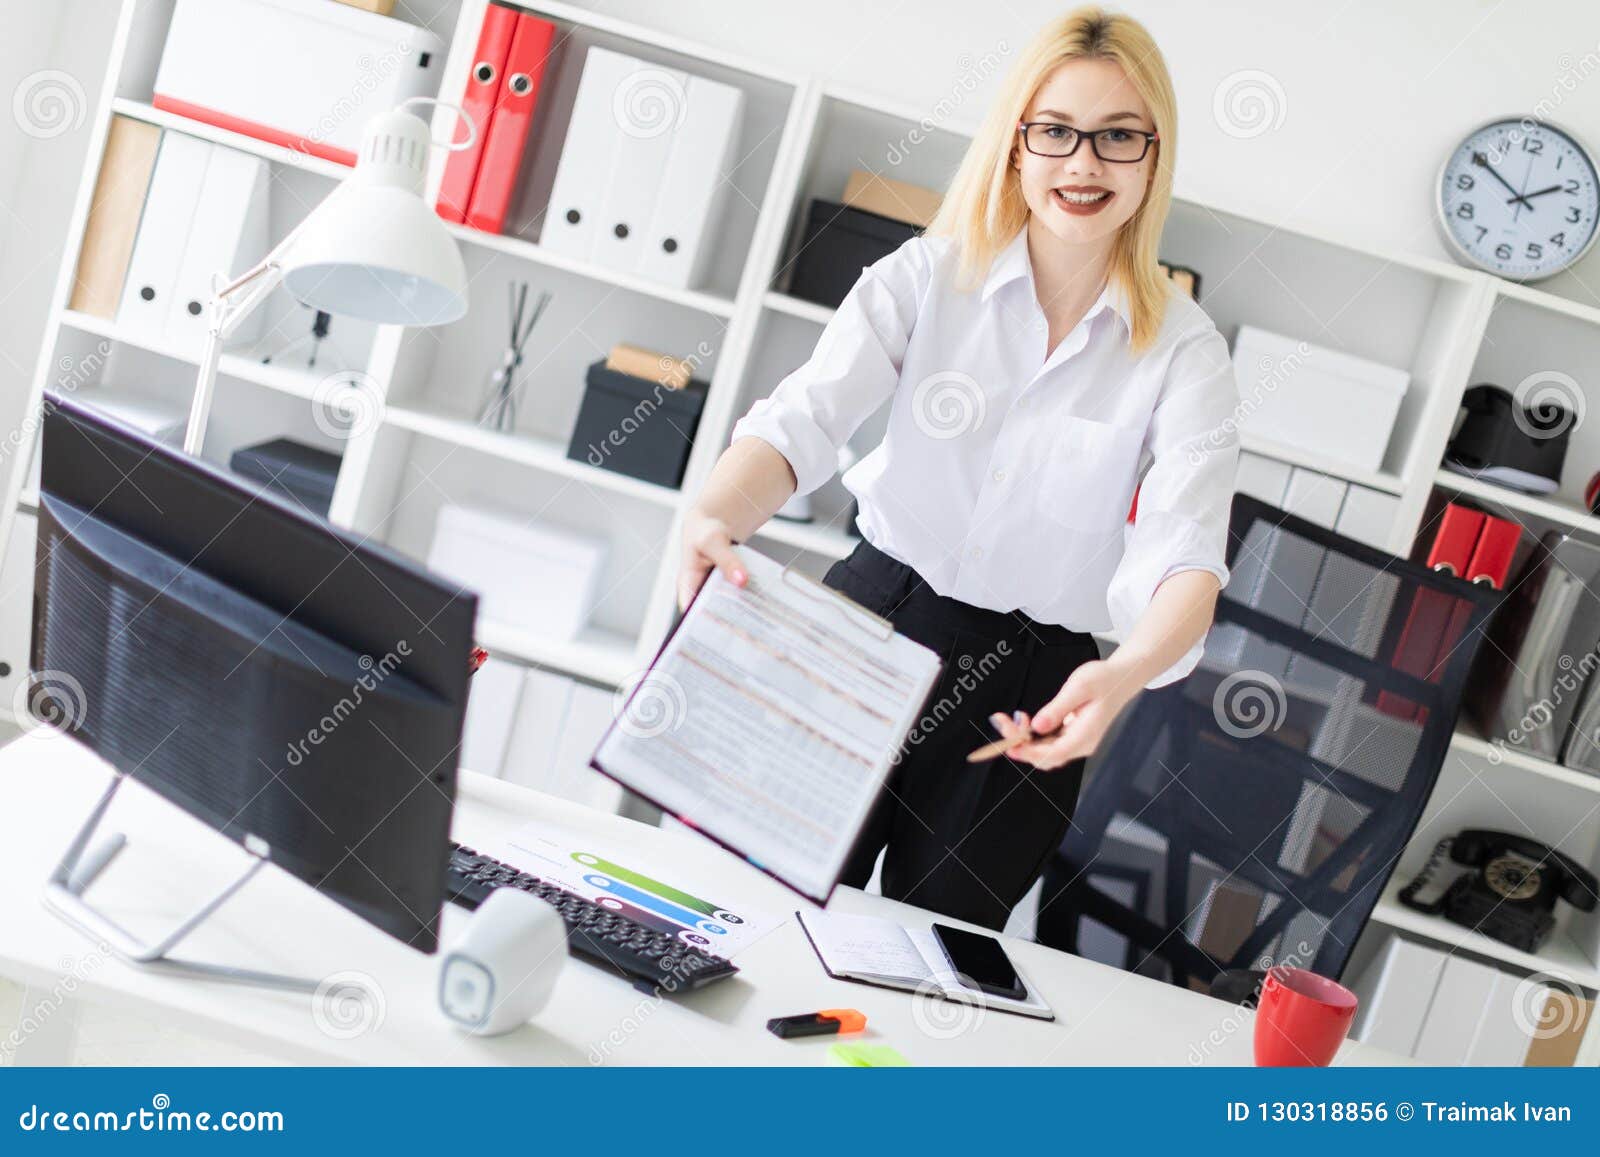 A Young Girl Stands In The Office At A Computer Desk And Stretches